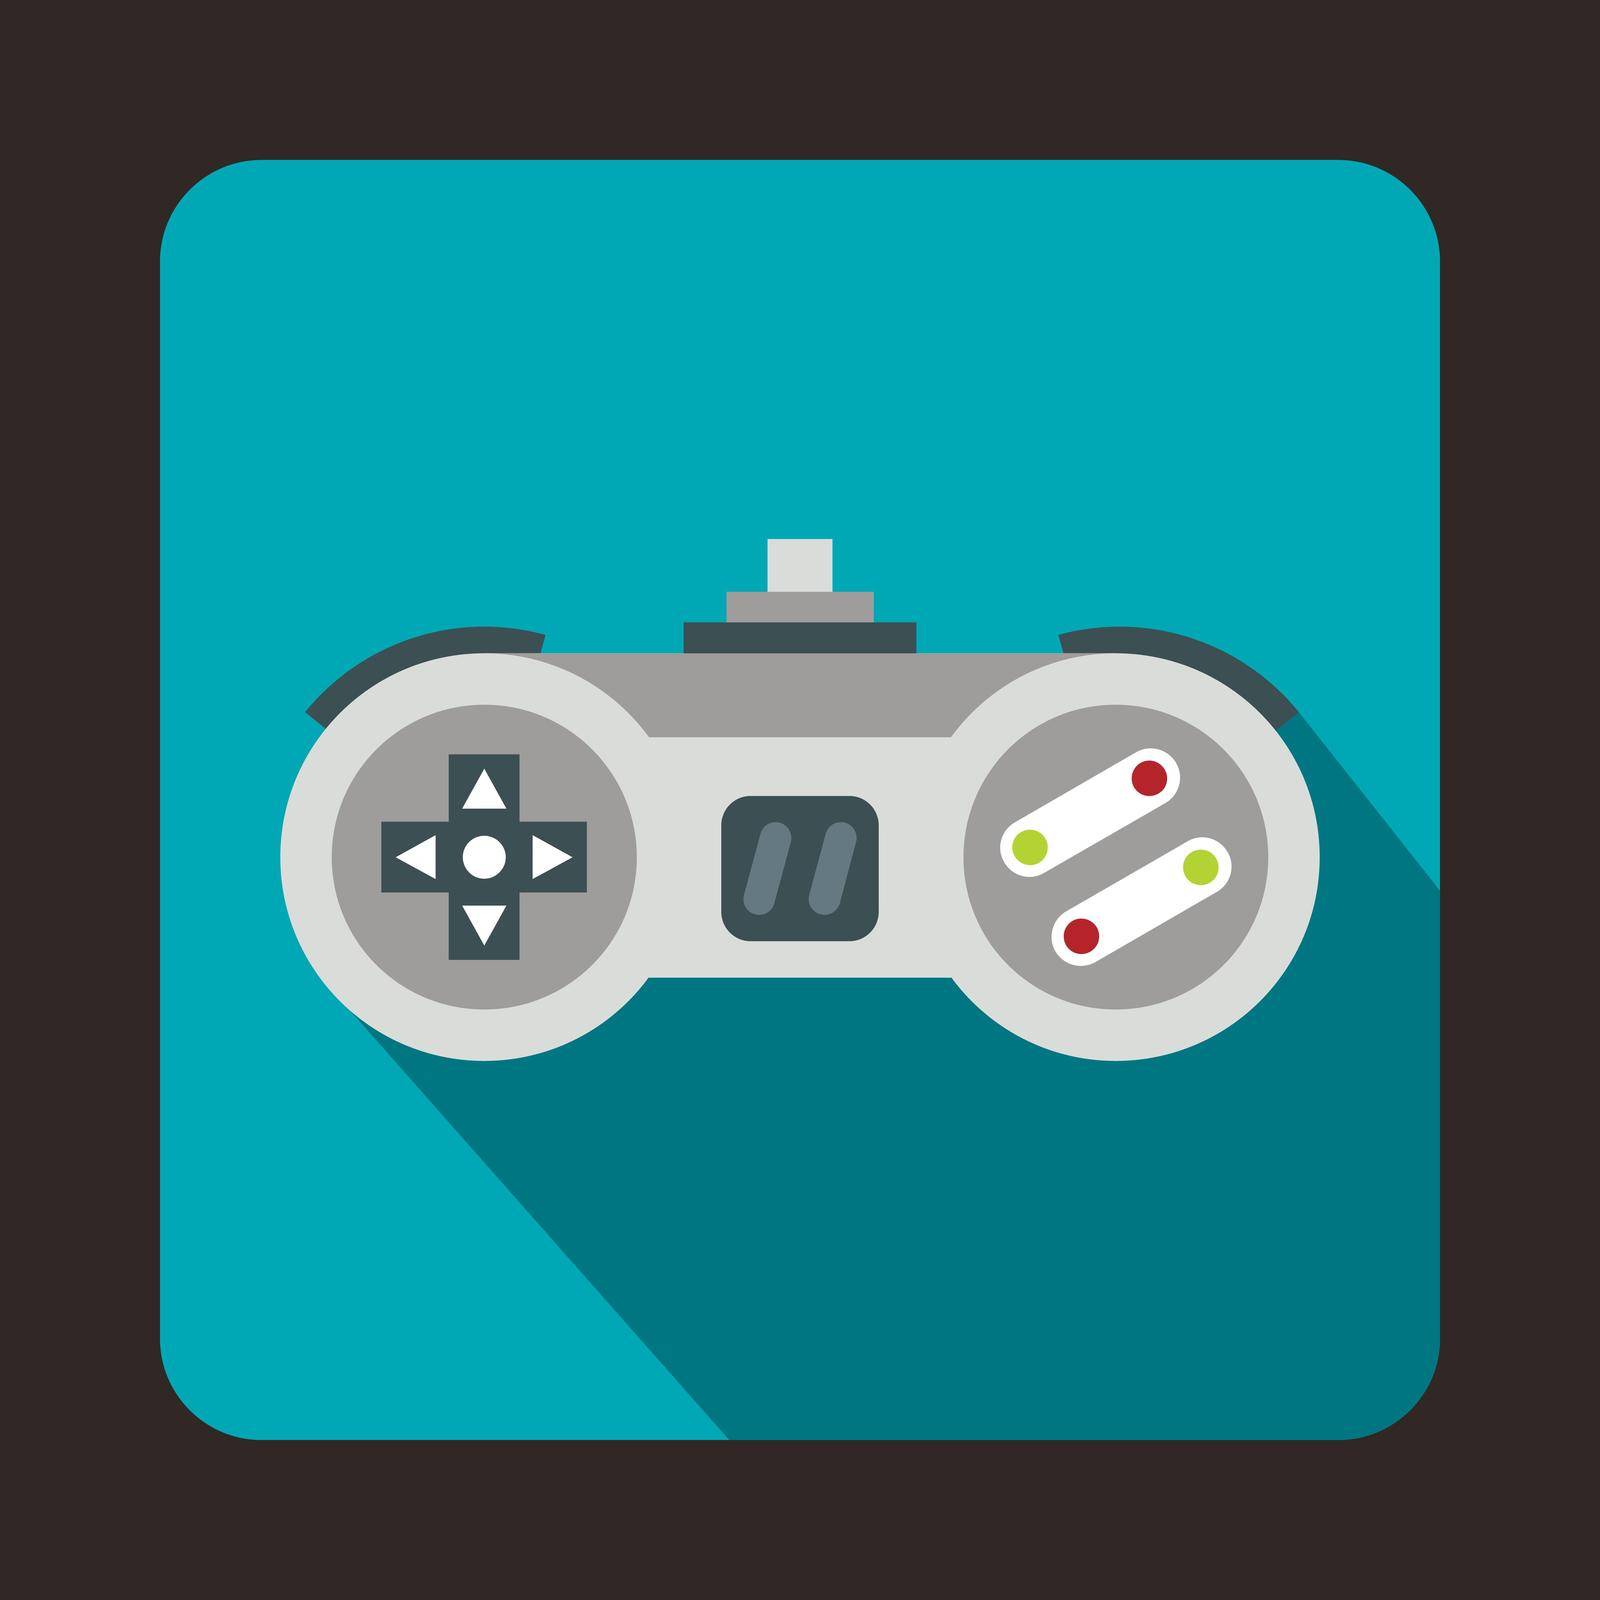 Joystick icon in flat style with long shadow. Play symbol